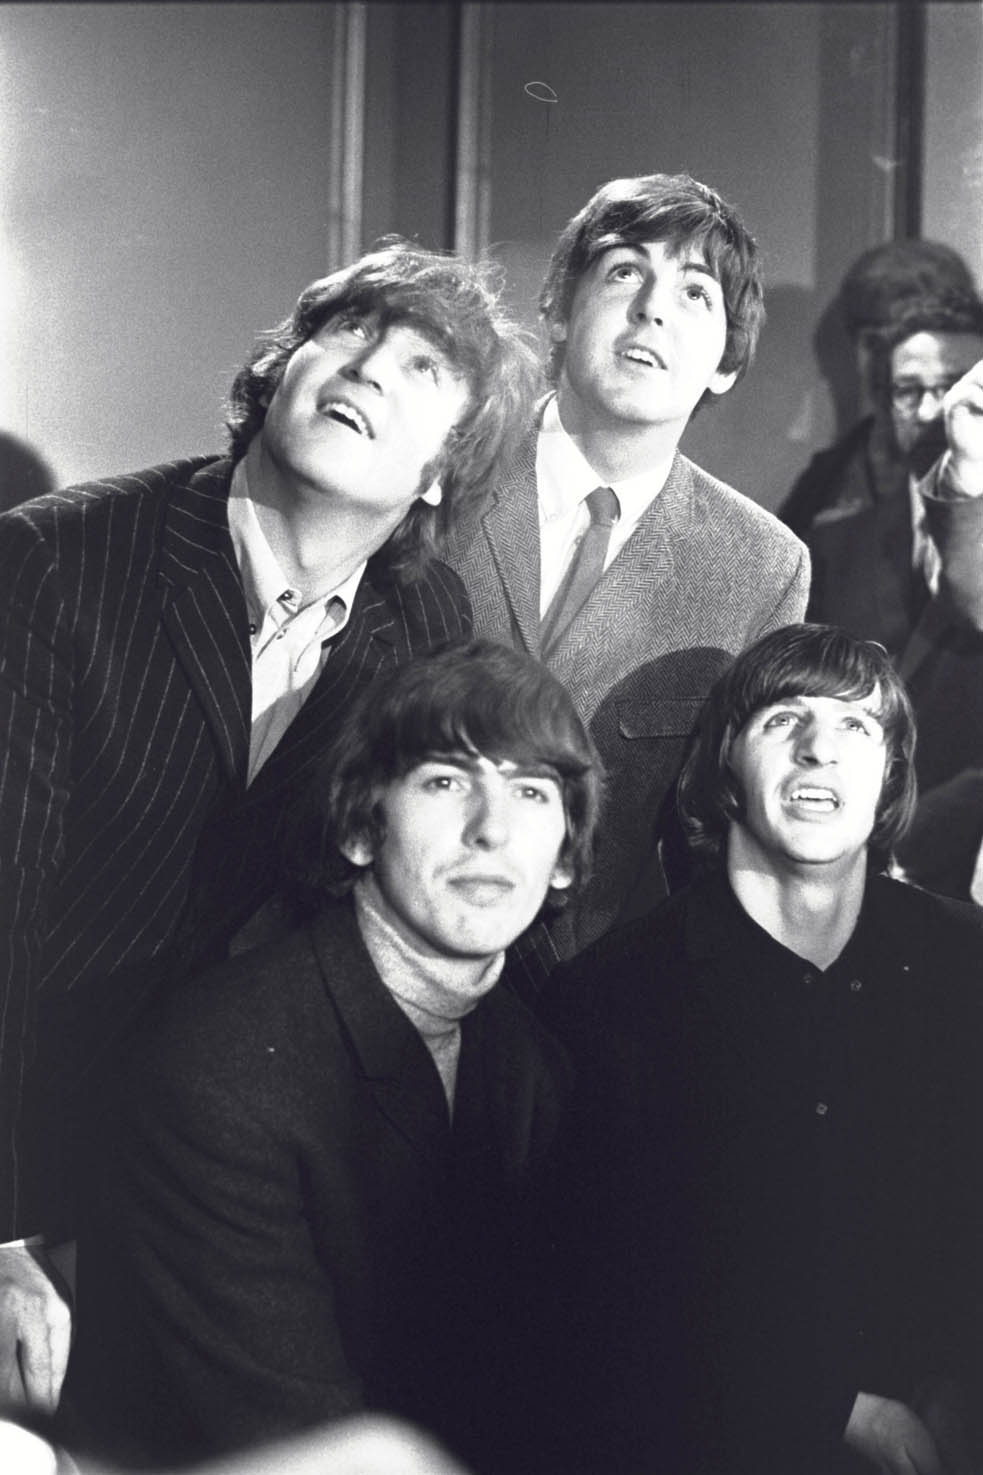 a picture of the beatles